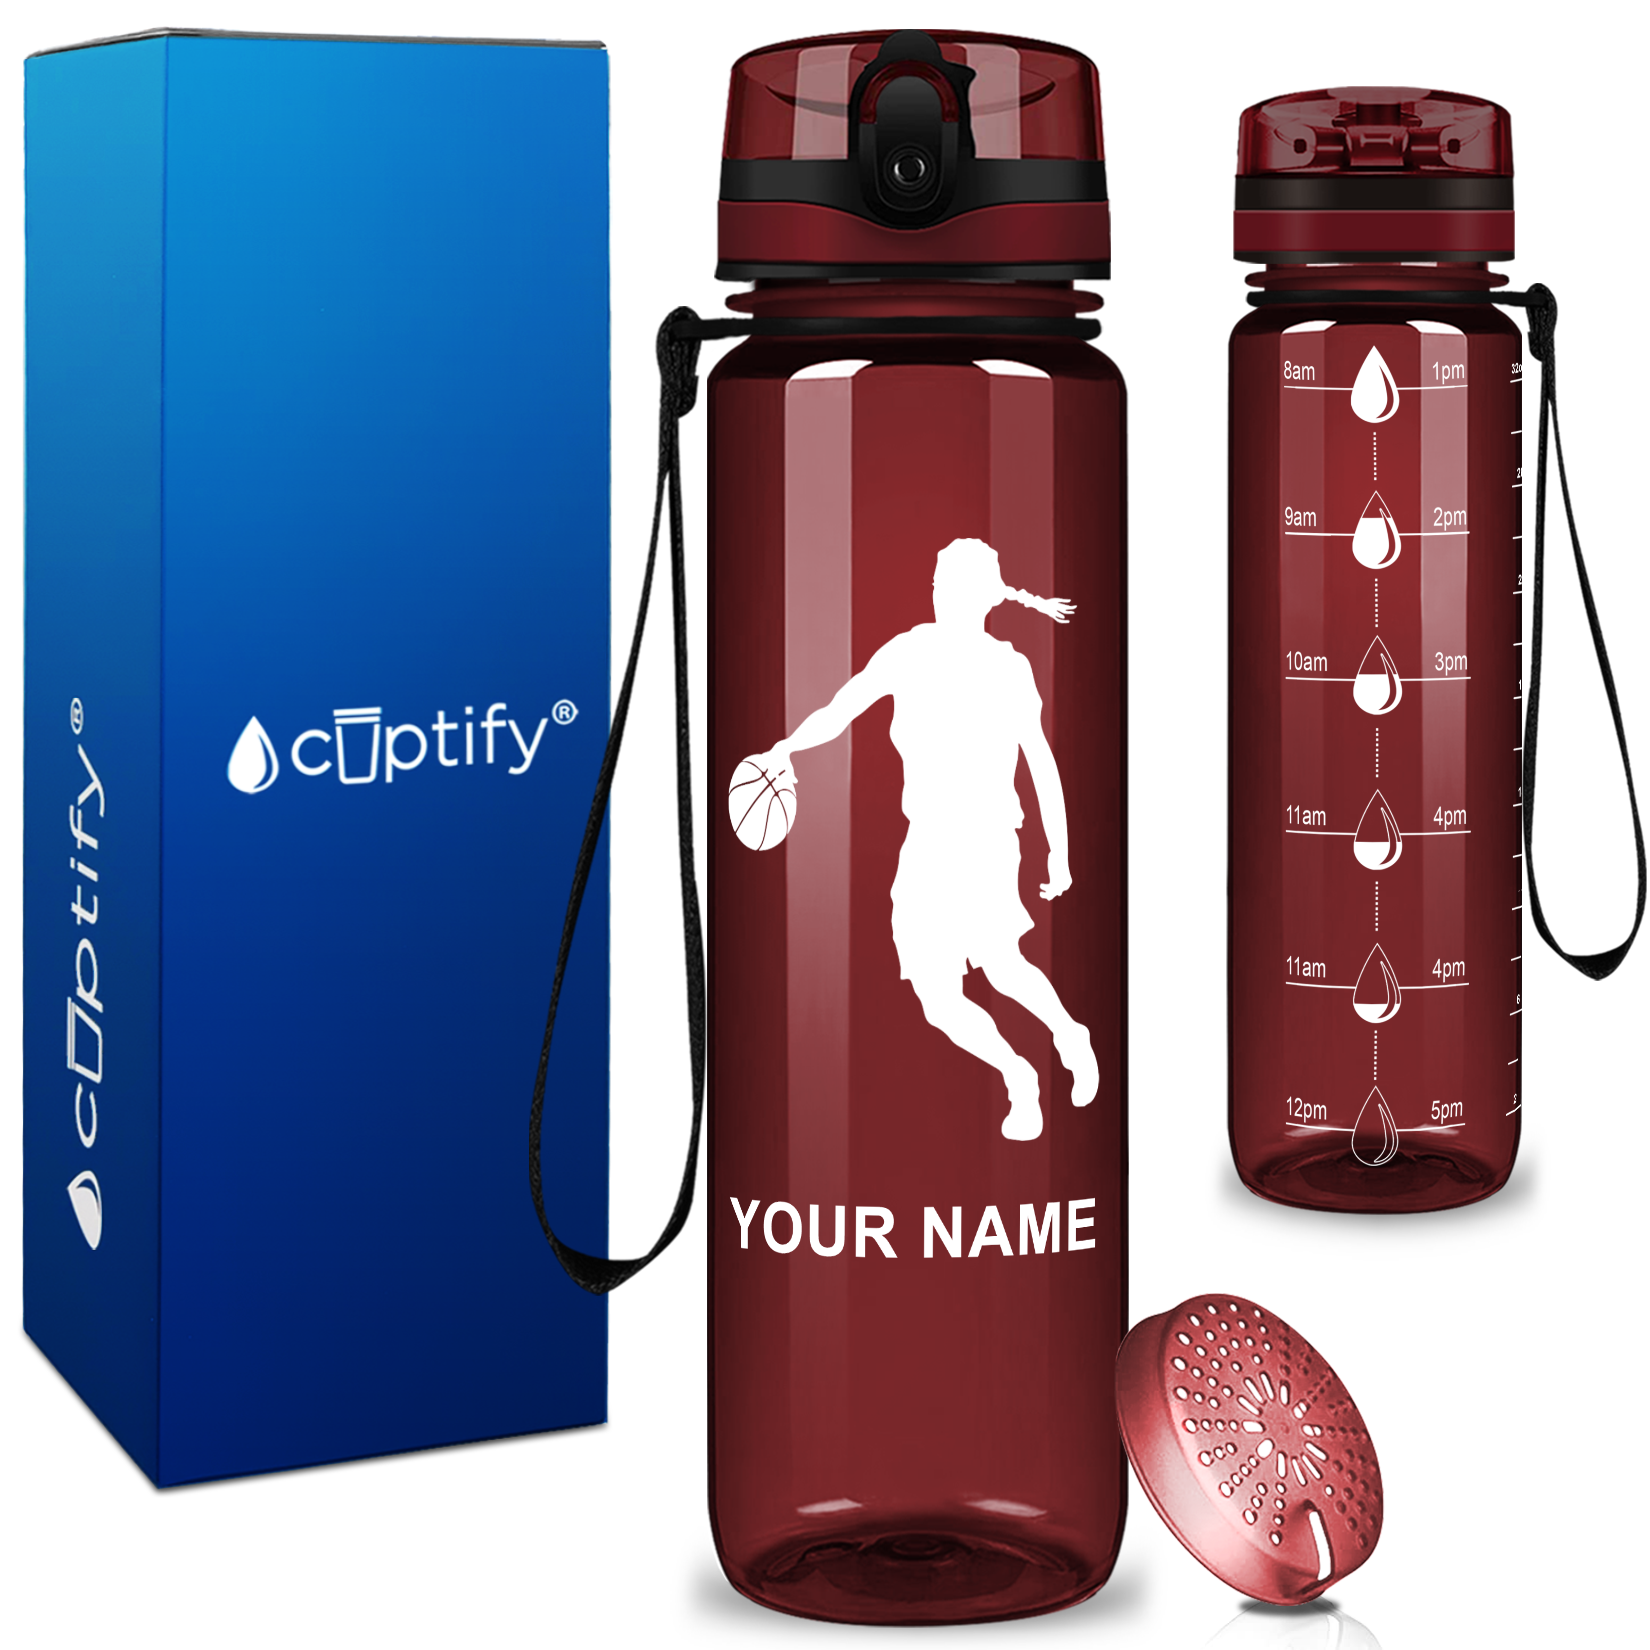 Personalized Basketball Female Player Silhouette on 32 oz Motivational Tracking Water Bottle